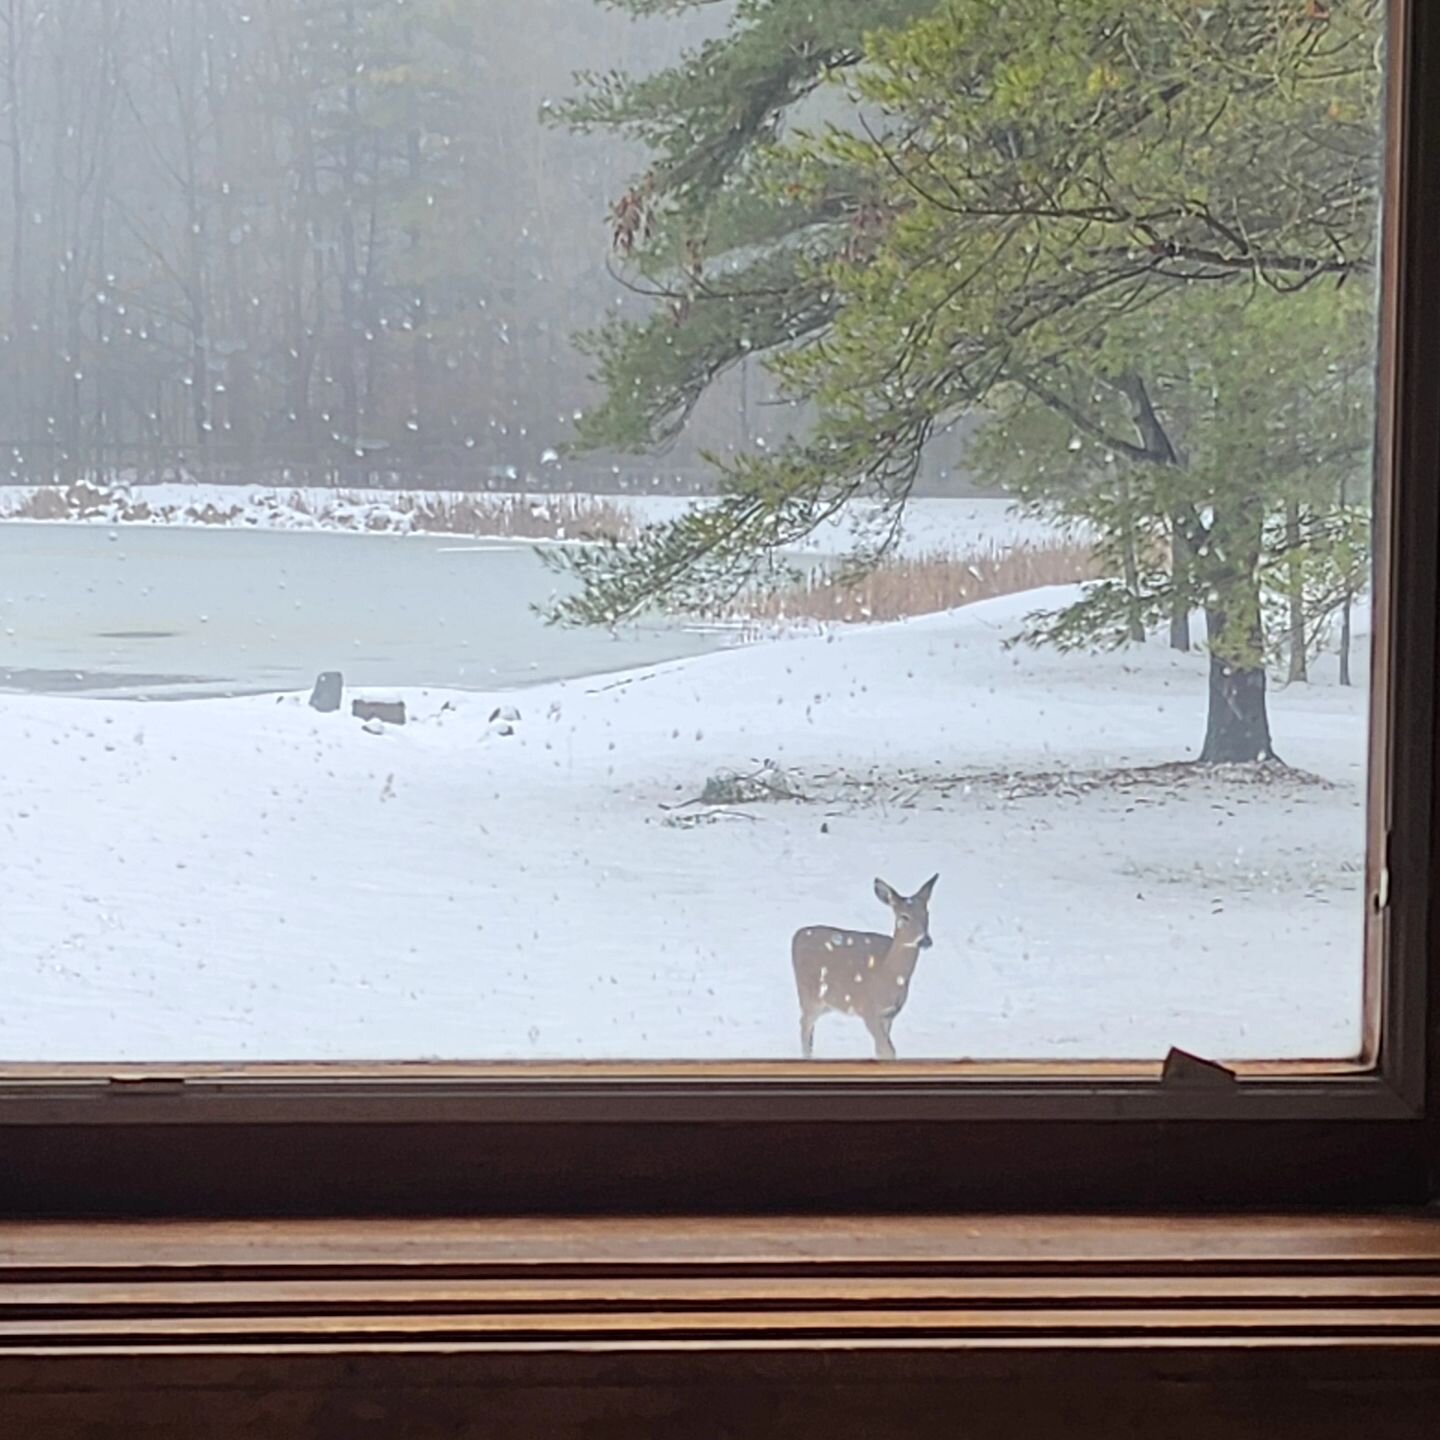 Looked out the window and saw this beautiful deer ❄️🤍